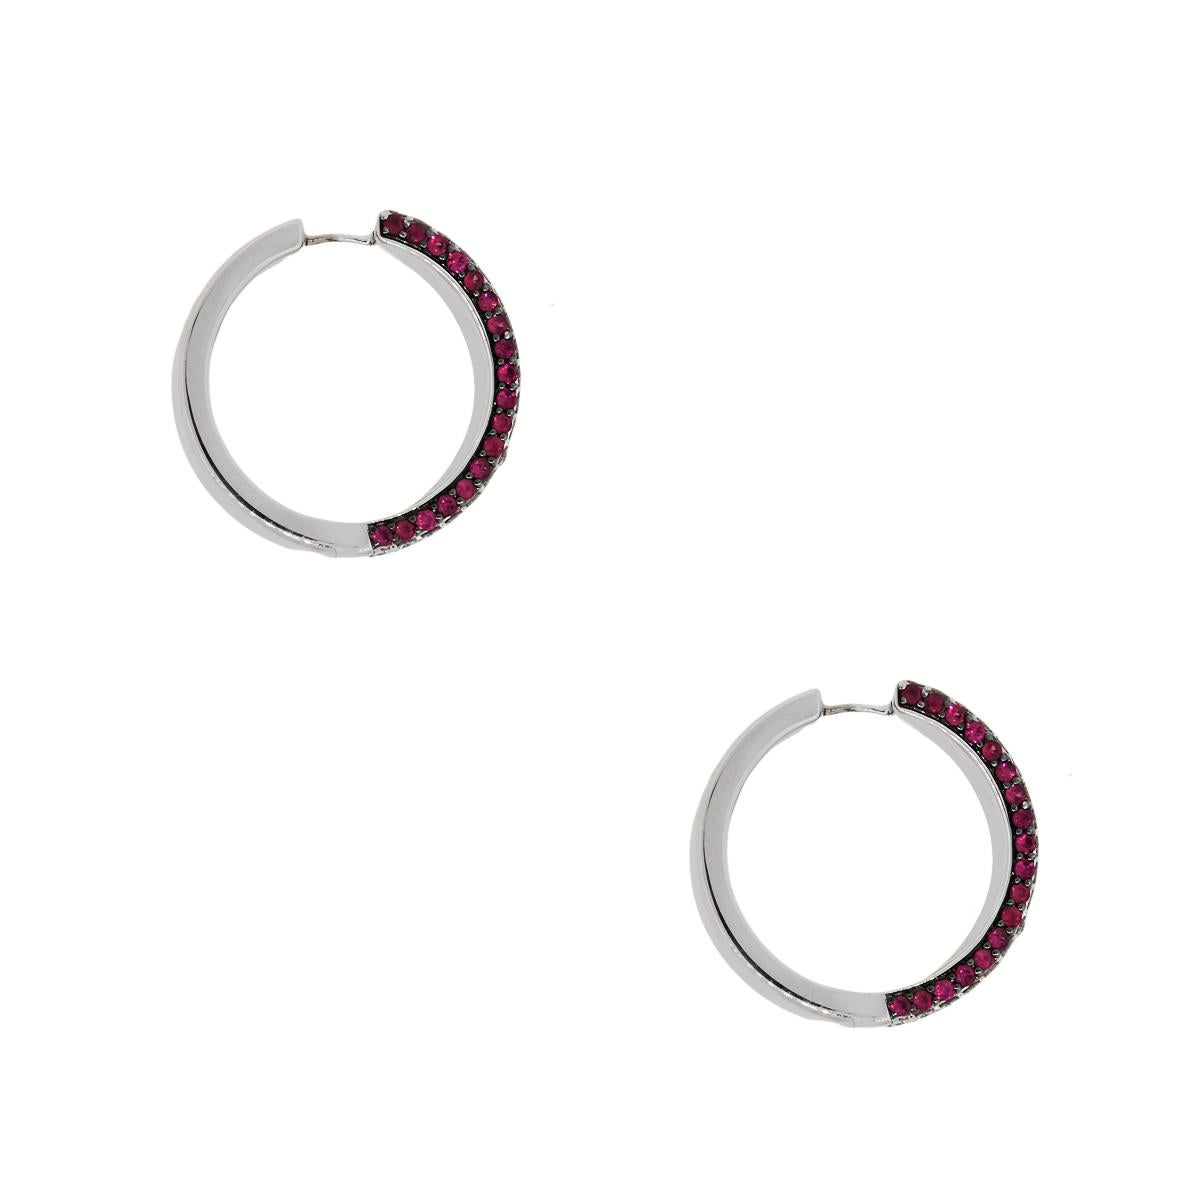 Style: 18k White Gold Round Diamond and Ruby Earrings
Material: 18k White Gold
Measurements: 0.90″ x 0.40″ x 0.90″
Diamond Detail: Approximately 1.85ctw of Round Diamonds. Diamonds are G in color and VS in clarity
Gemstone Details: Approximately